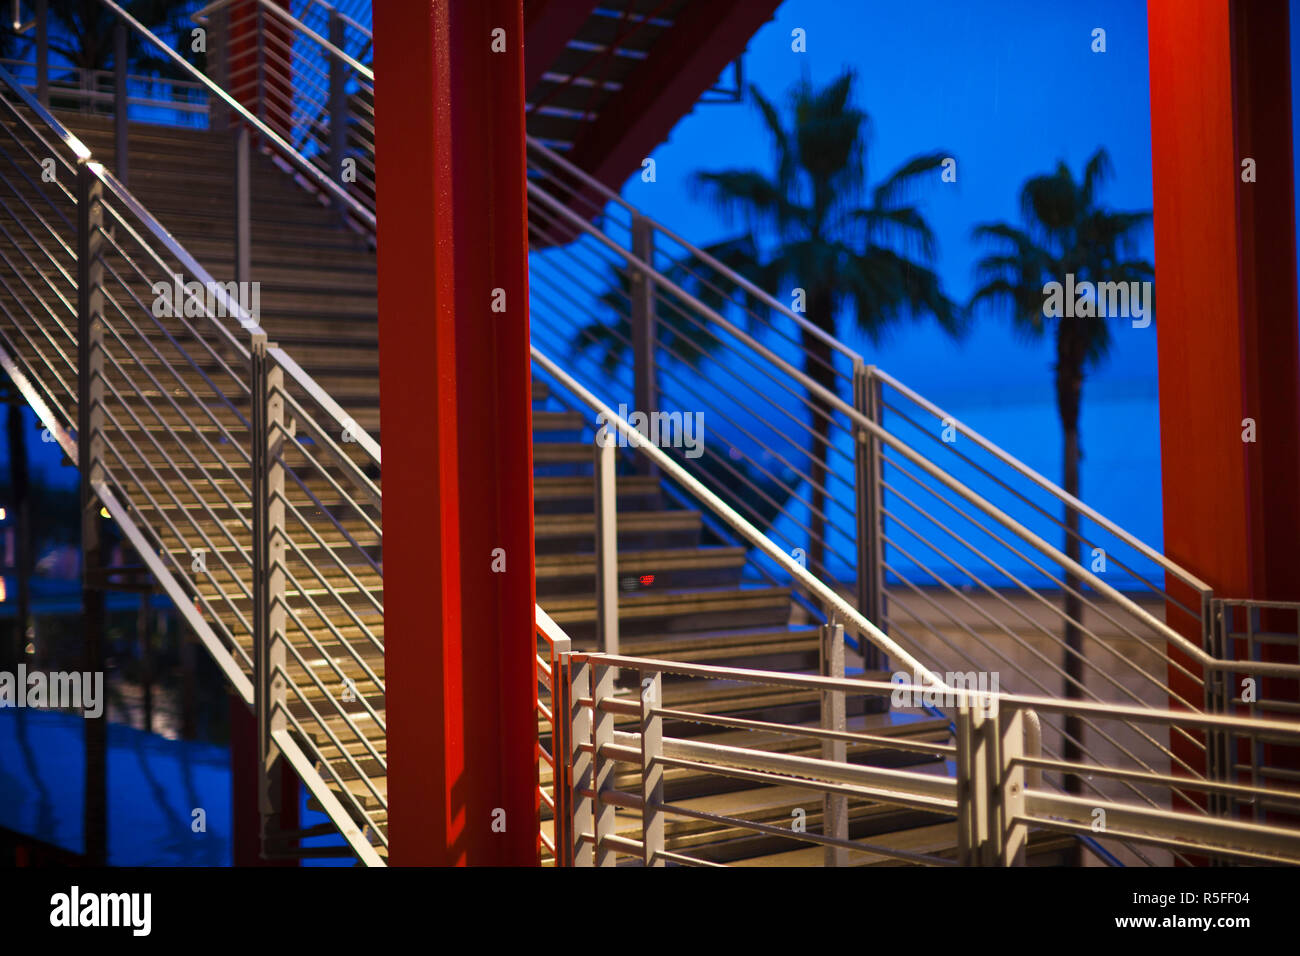 USA, California, Southern California, Los Angeles, Los Angeles County Museum of Art, LACMA, Broad Contemporary Art Museum, walkway Stock Photo